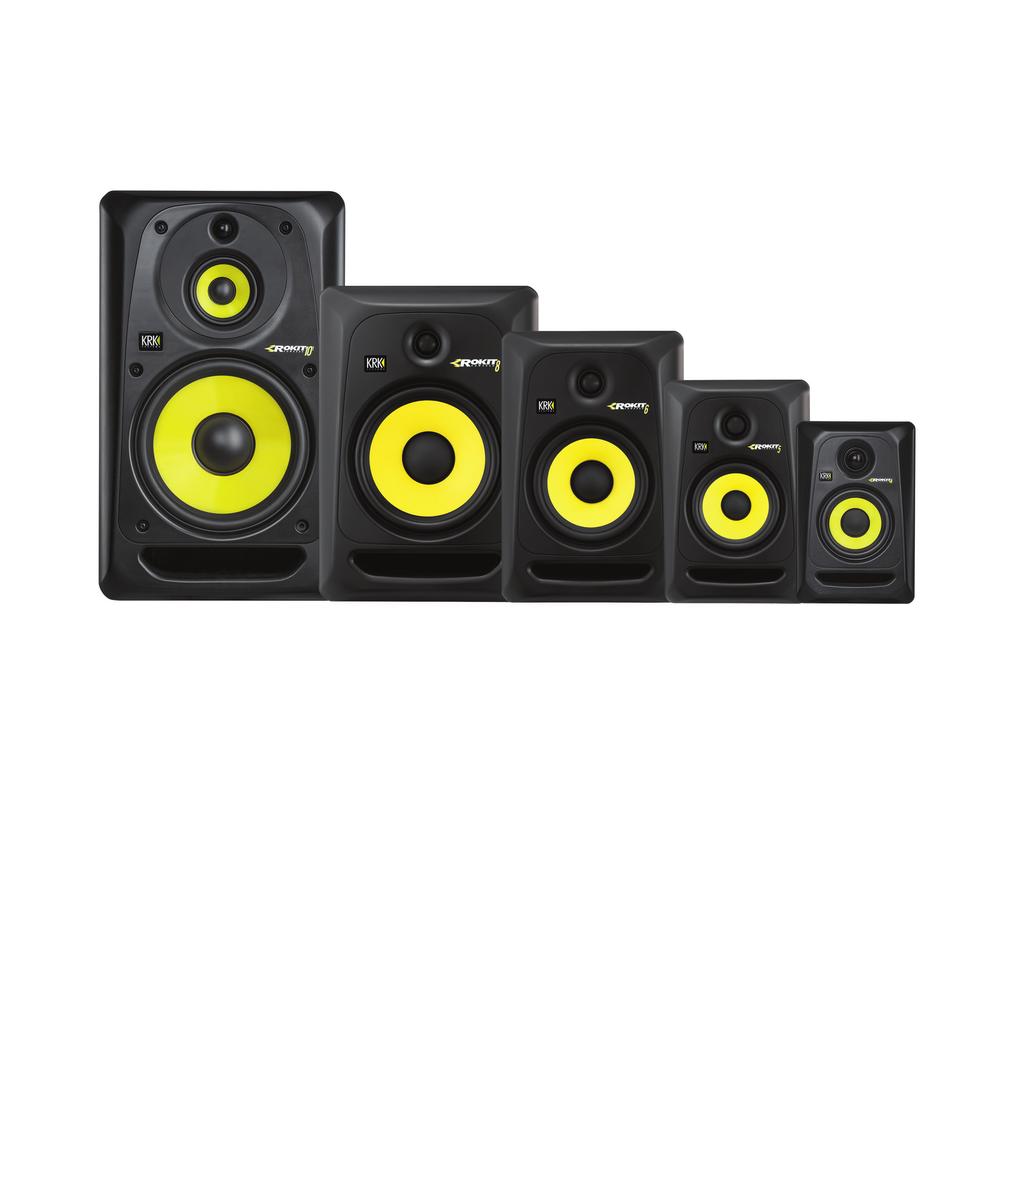 PRODUCT OVERVIEW NEW # 1 MONITOR BRAND GLOBALLY NEW For a quarter of a century KRK have been the professional s choice for mixing and mastering hit records around the globe.